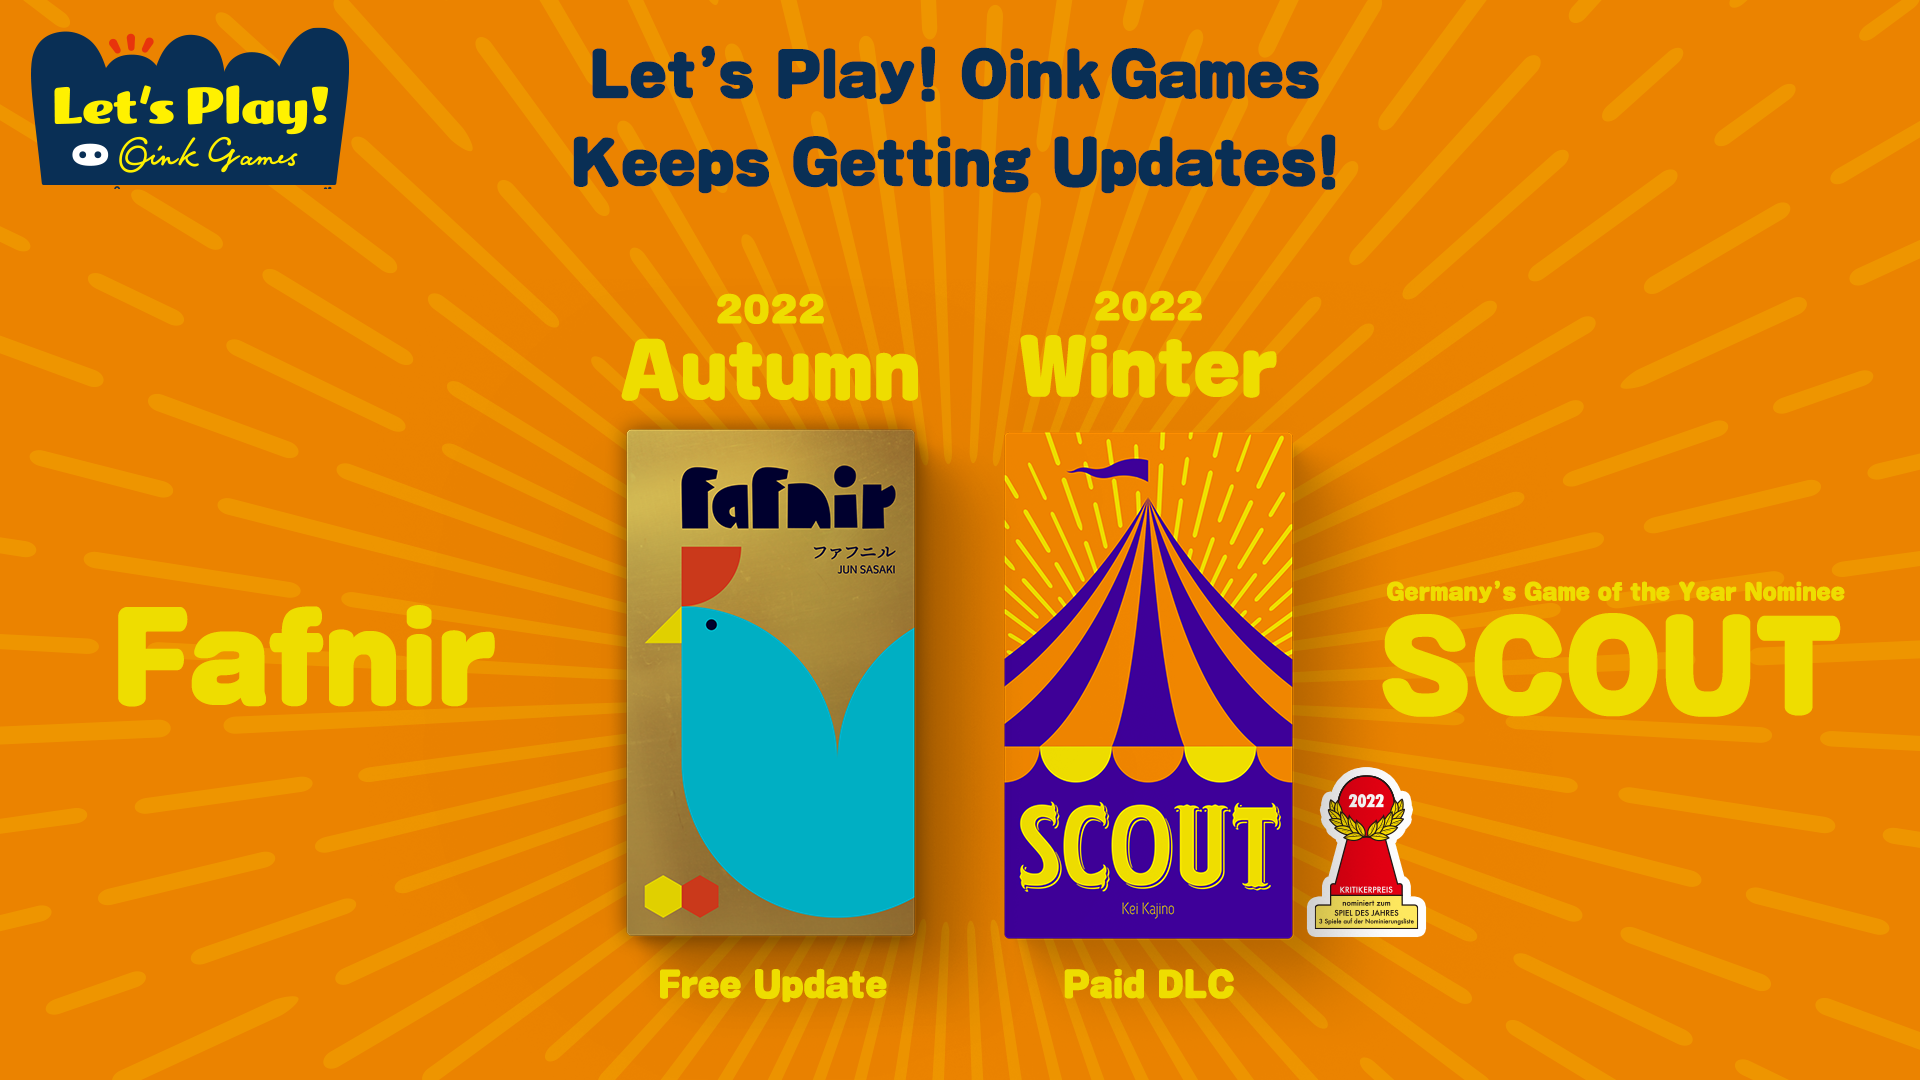 Free update today adds a new game, Fafnir to Let's Play! Oink